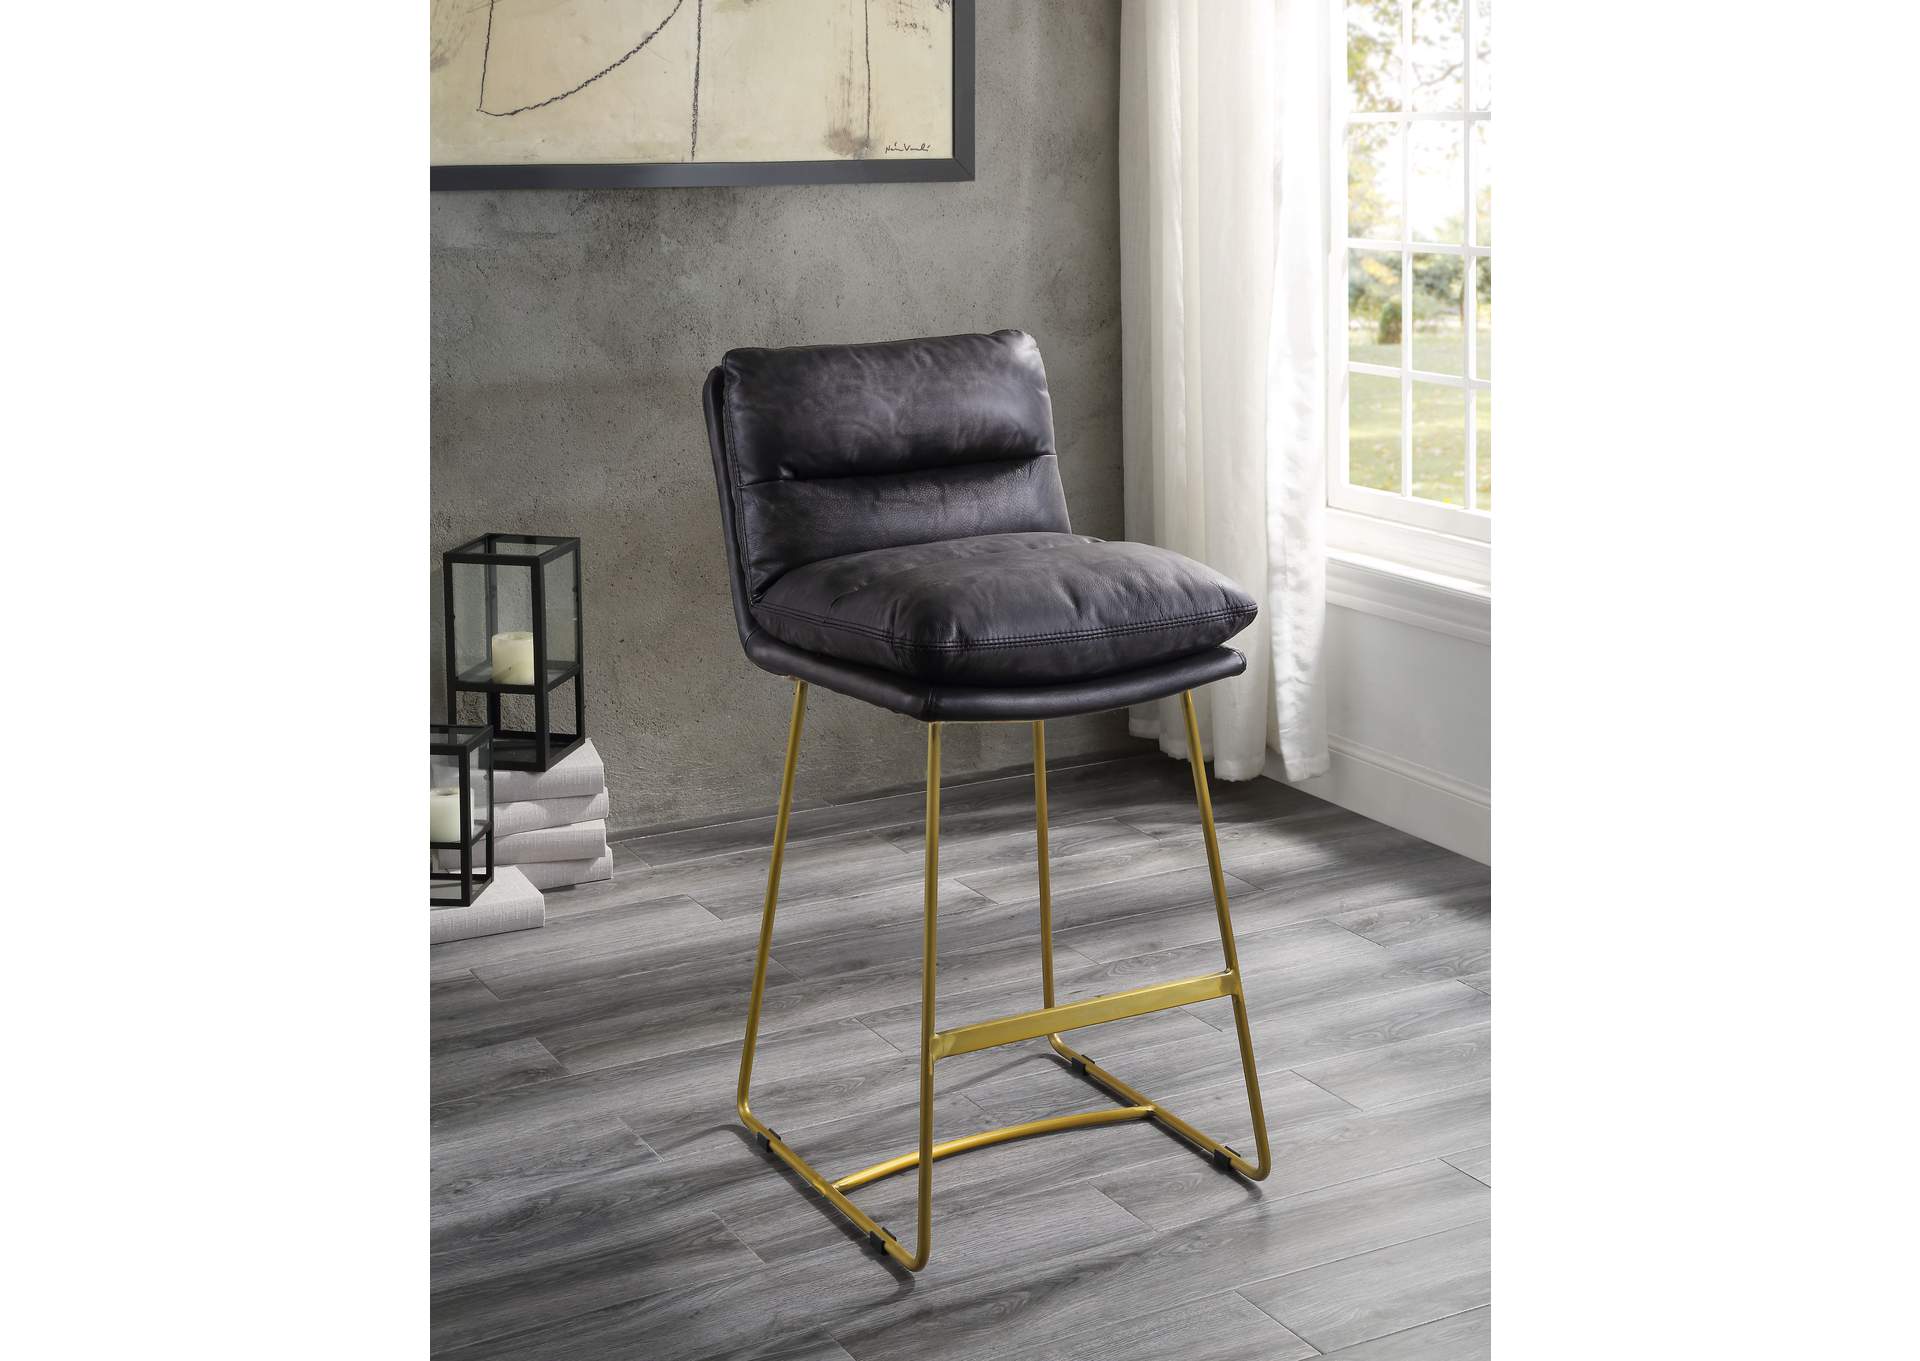 Alsey Counter Height Chair,Acme